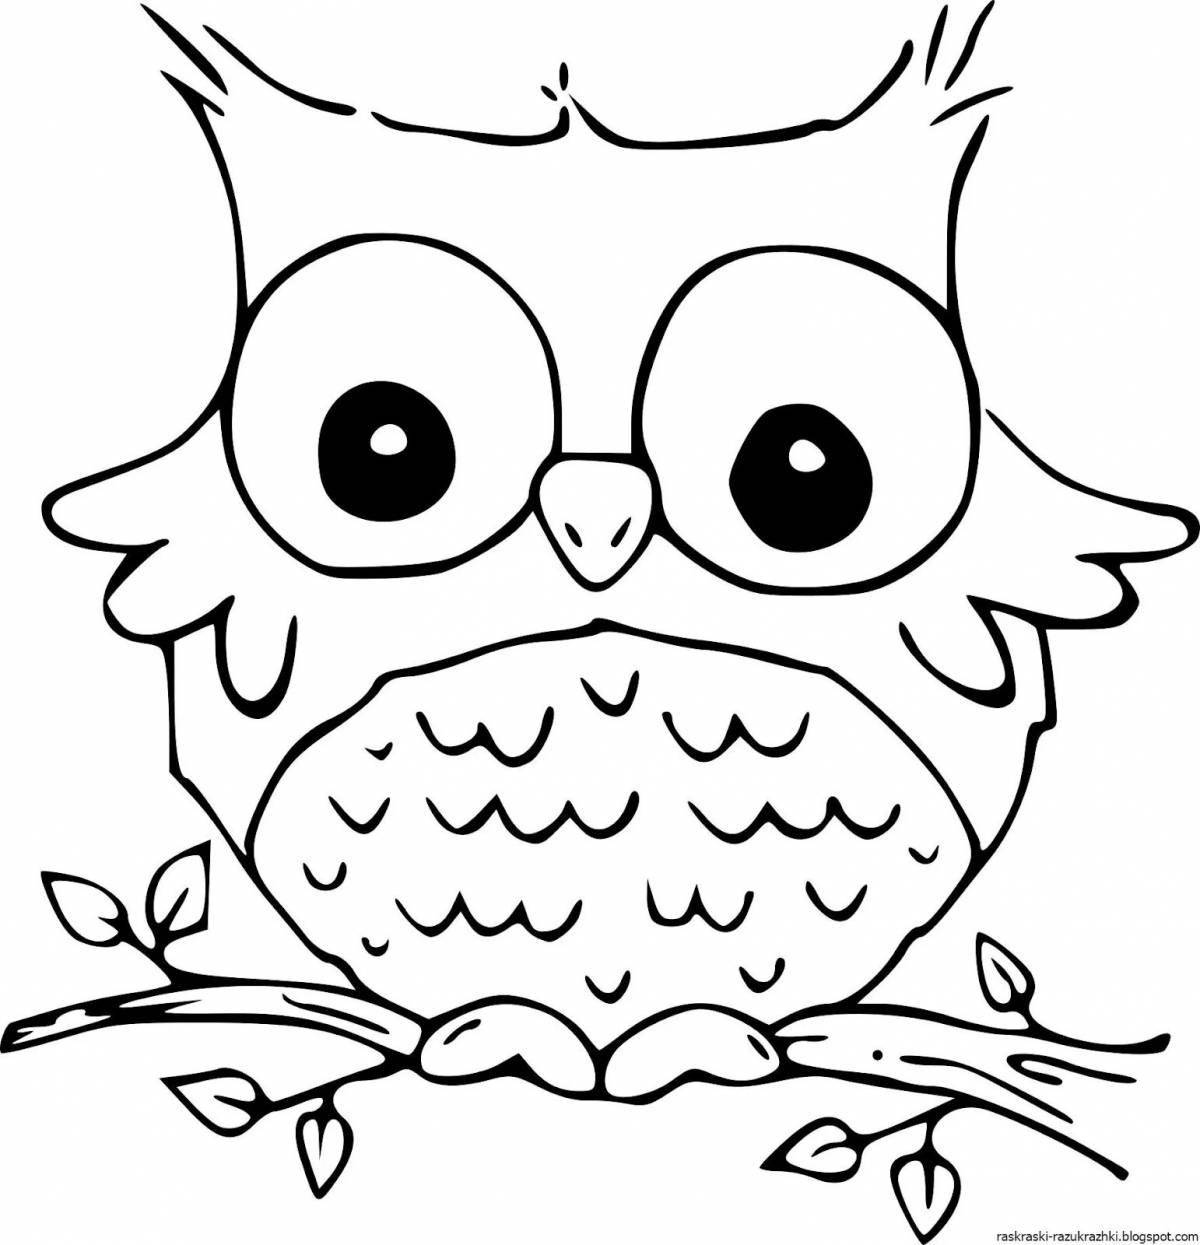 Dazzling owl coloring book for kids